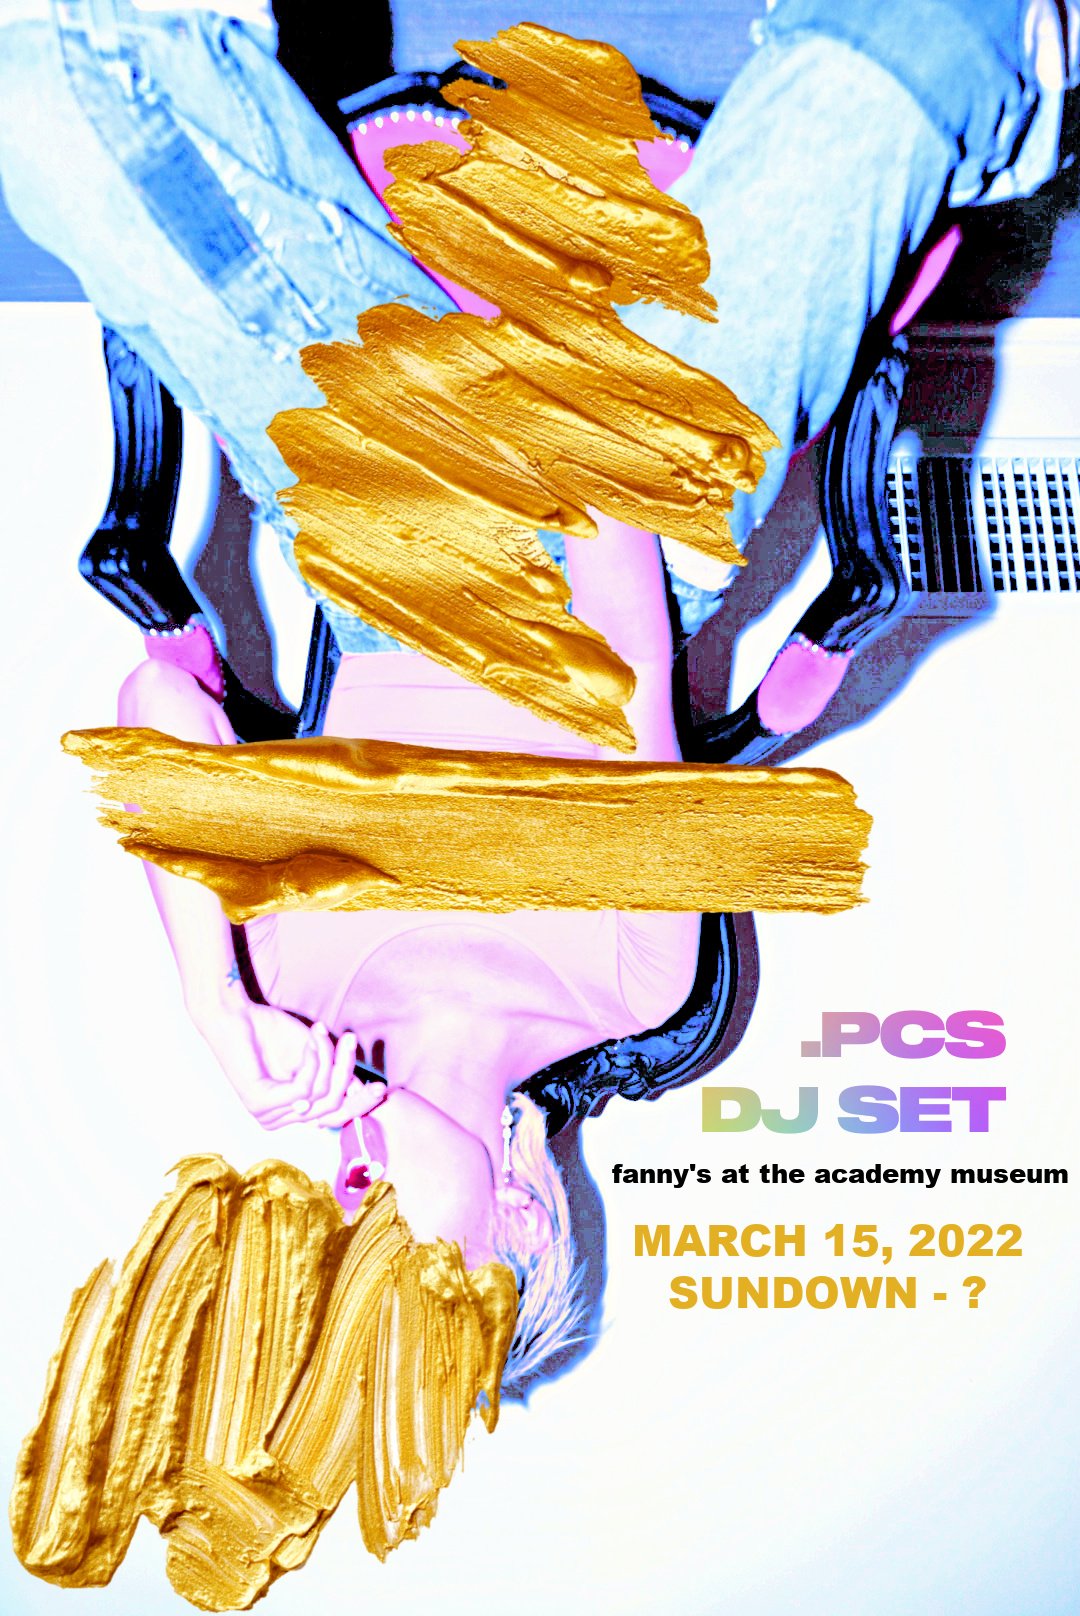 DJ PRINCESS CYBERSPACE AT THE ACADEMY MUSEUM MARCH 2022.jpg